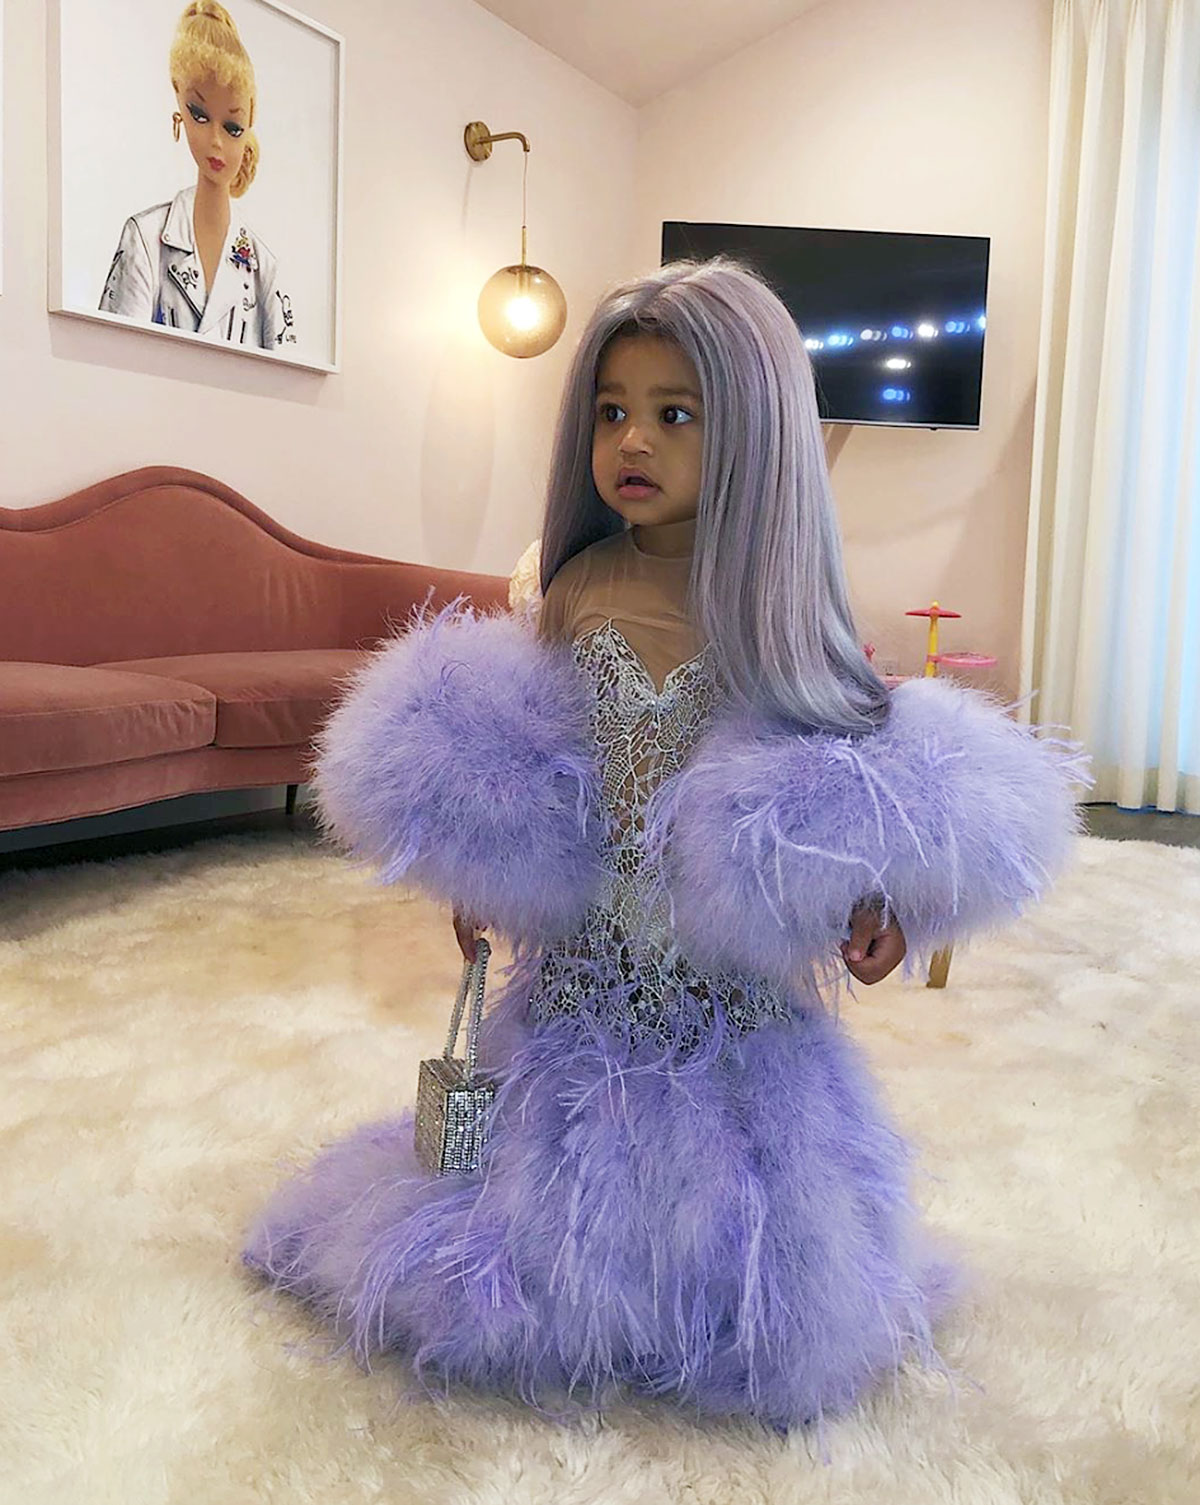 Photos from Kylie Jenner and Stormi Webster Play Dress-Up in Her